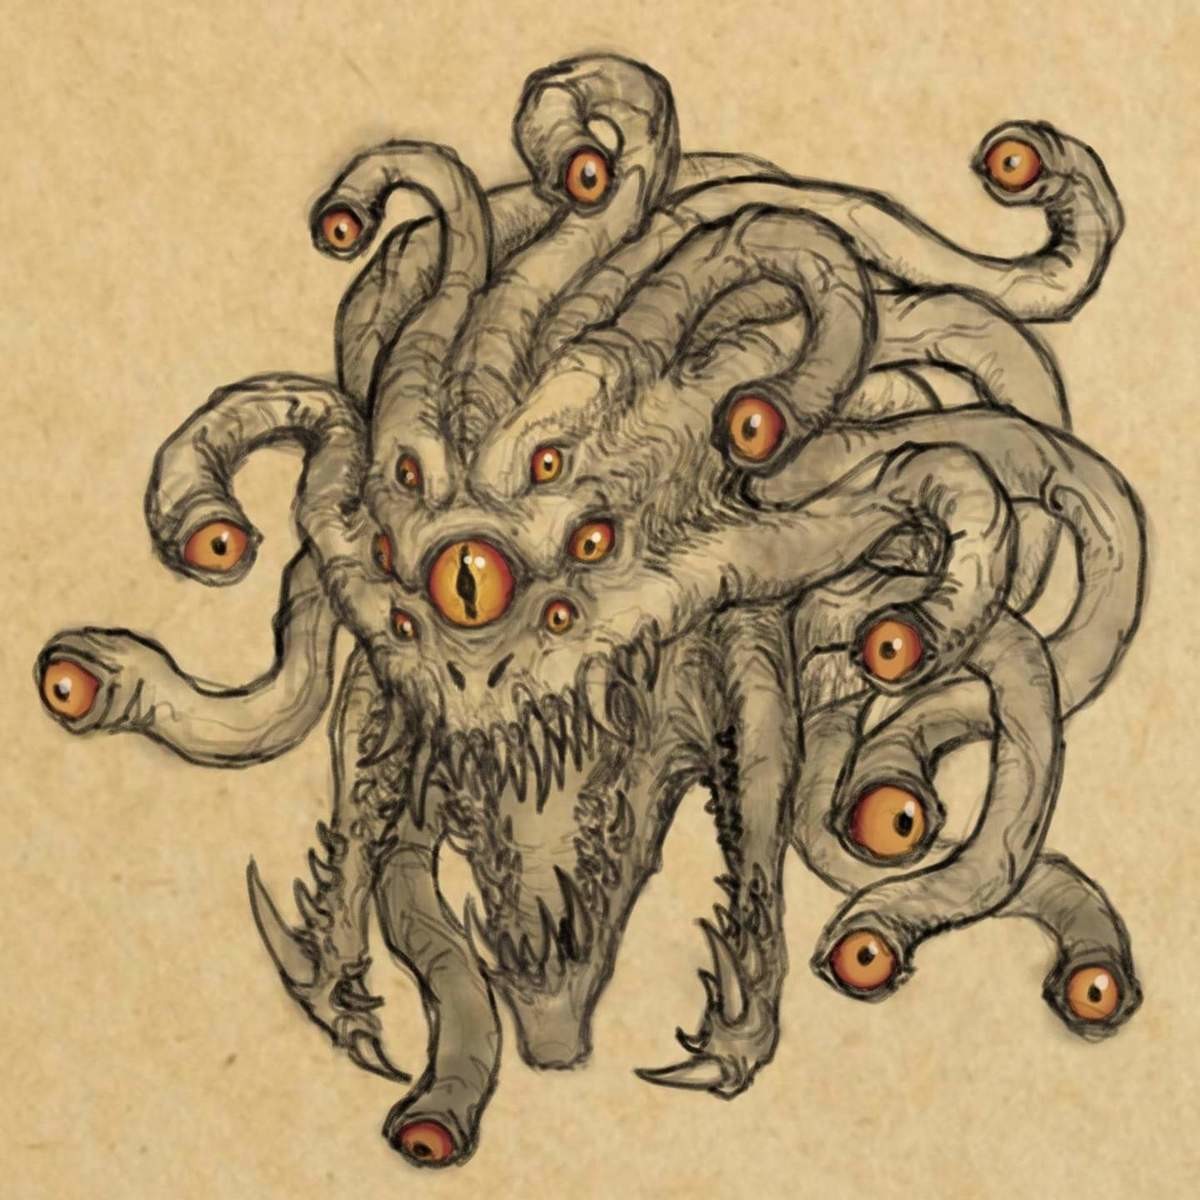 The Beholder. .. that is NOT a beholder. count those up, that's SEVENTEEN EYES. beholders are supposed to have ten eyestalks and ONE central eye! I can only imagine what horribl